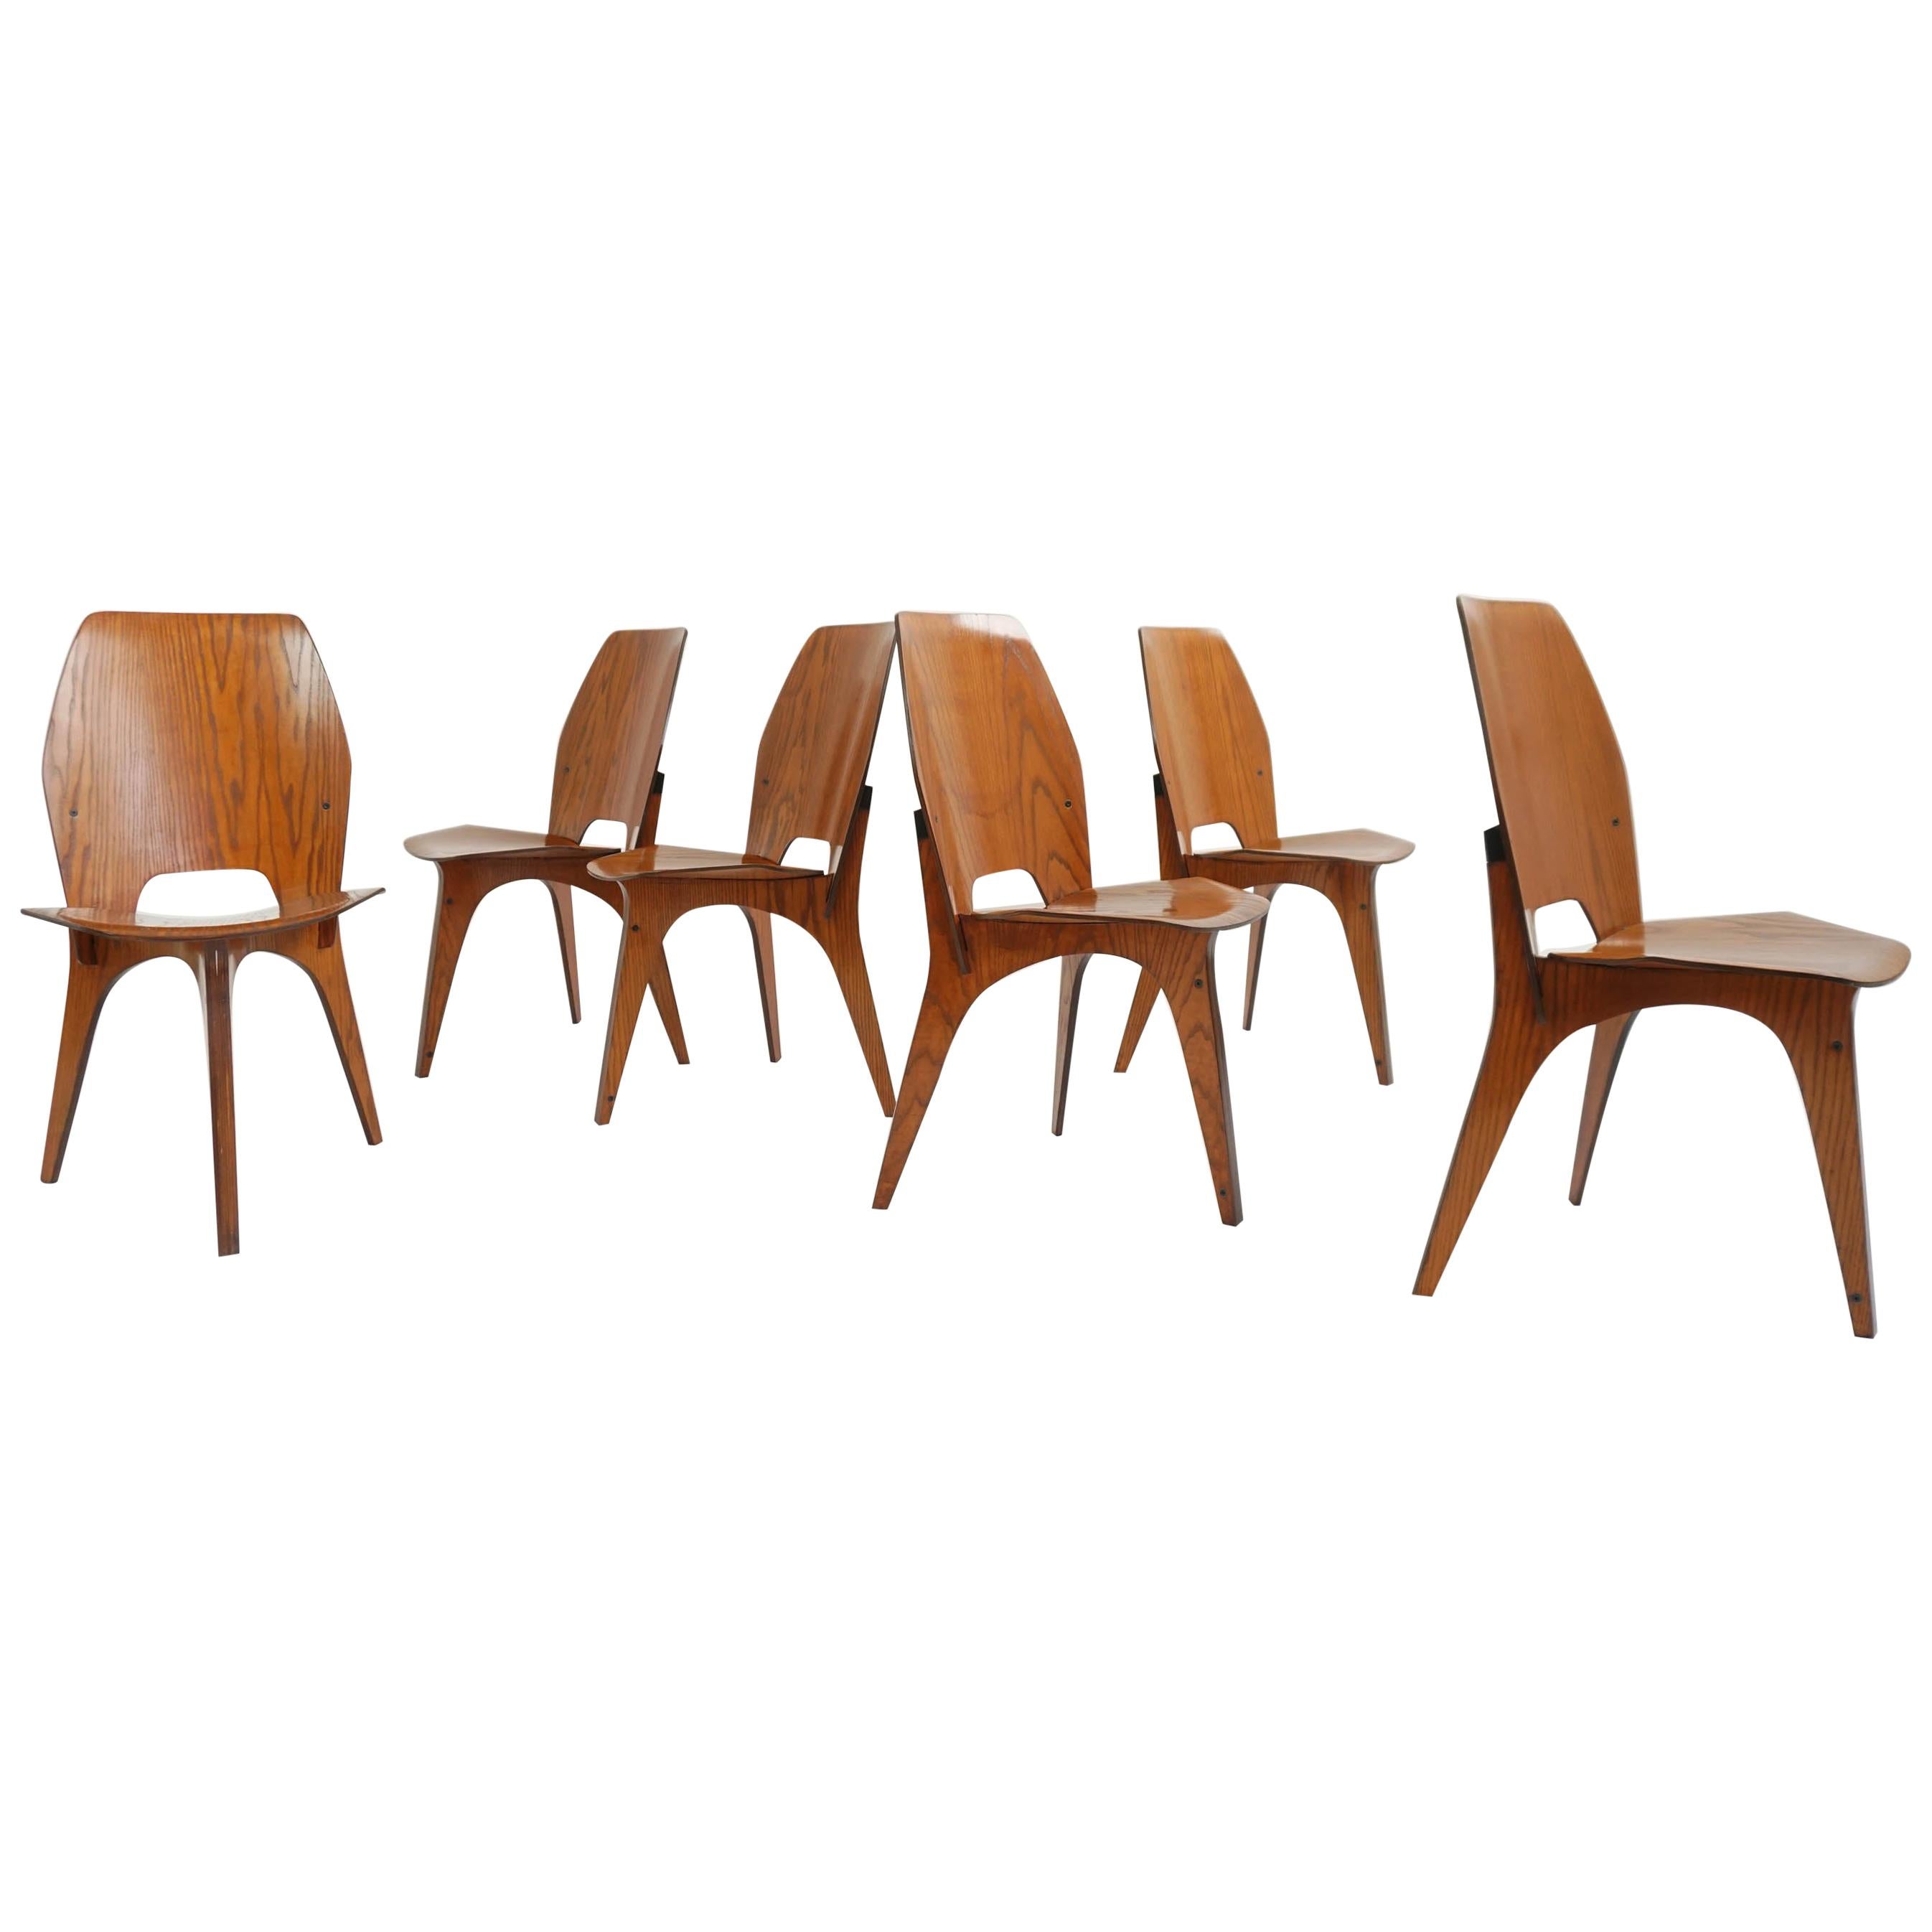 Eugenio Gerli for Tecno, Italy 1959 Iconic and Rare Set of 6 Teak Plywood Chairs For Sale